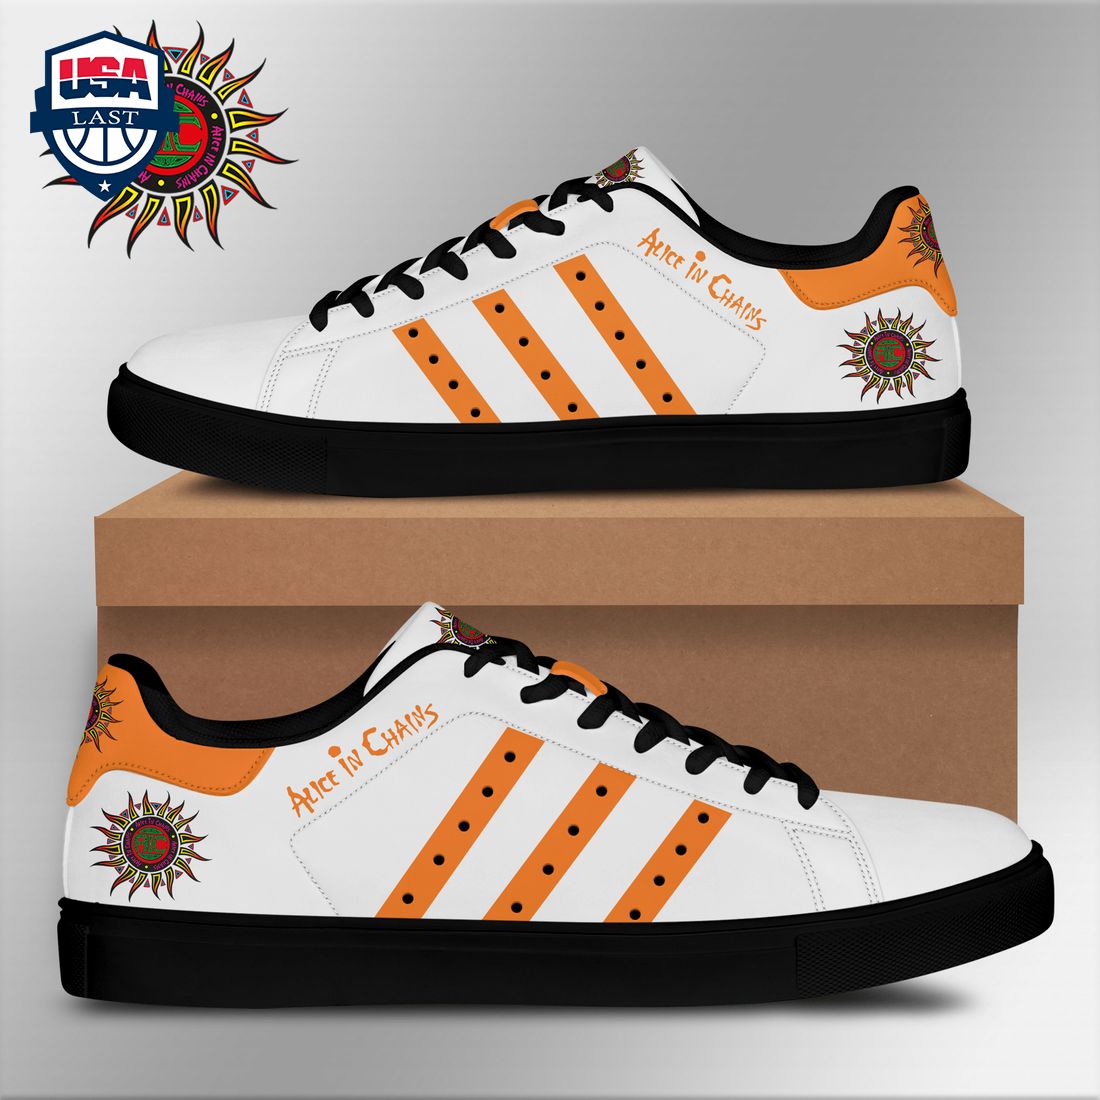 alice-in-chains-orange-stripes-style-1-stan-smith-low-top-shoes-1-7TZ54.jpg